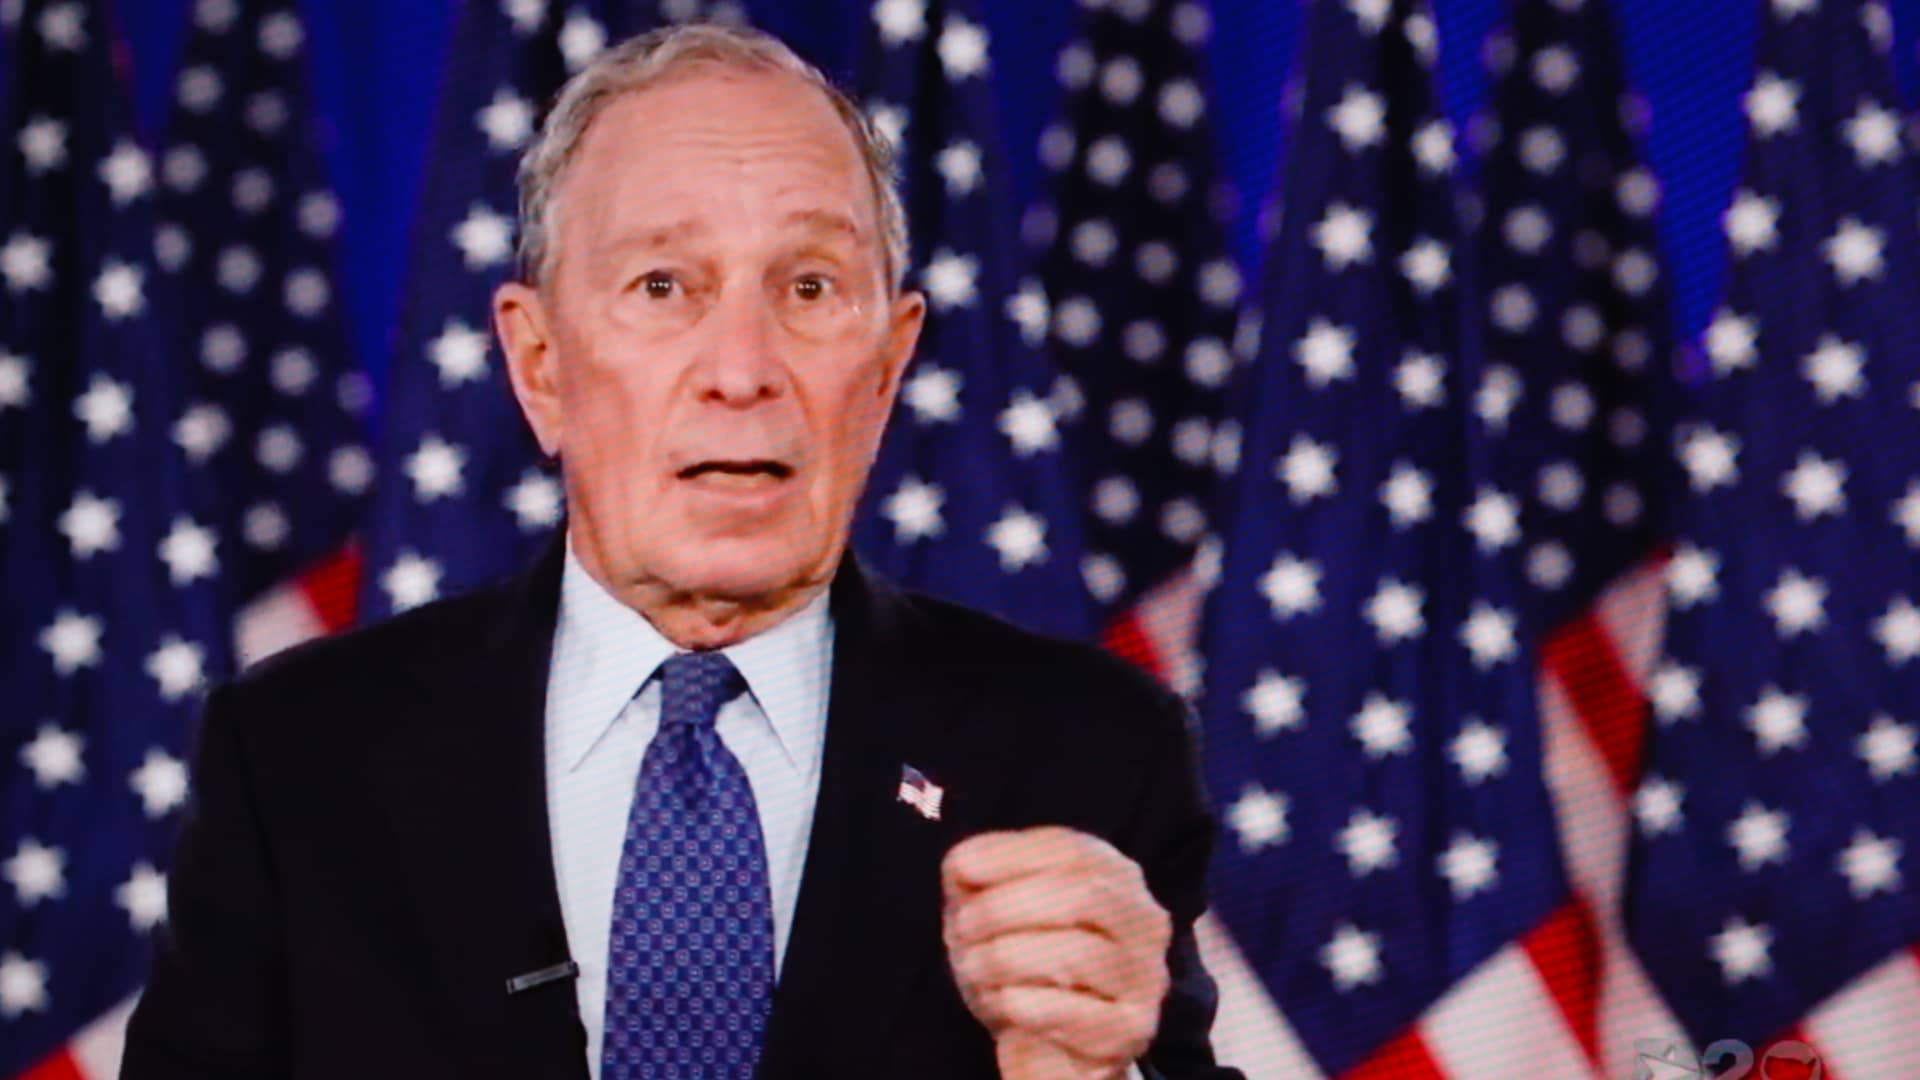 Former New York City Mayor Michael Bloomberg addresses the virtual 2020 Democratic National Convention, livestreamed online and viewed by laptop from the United Kingdom in the early hours of August 21, 2020, in London, United Kingdom.